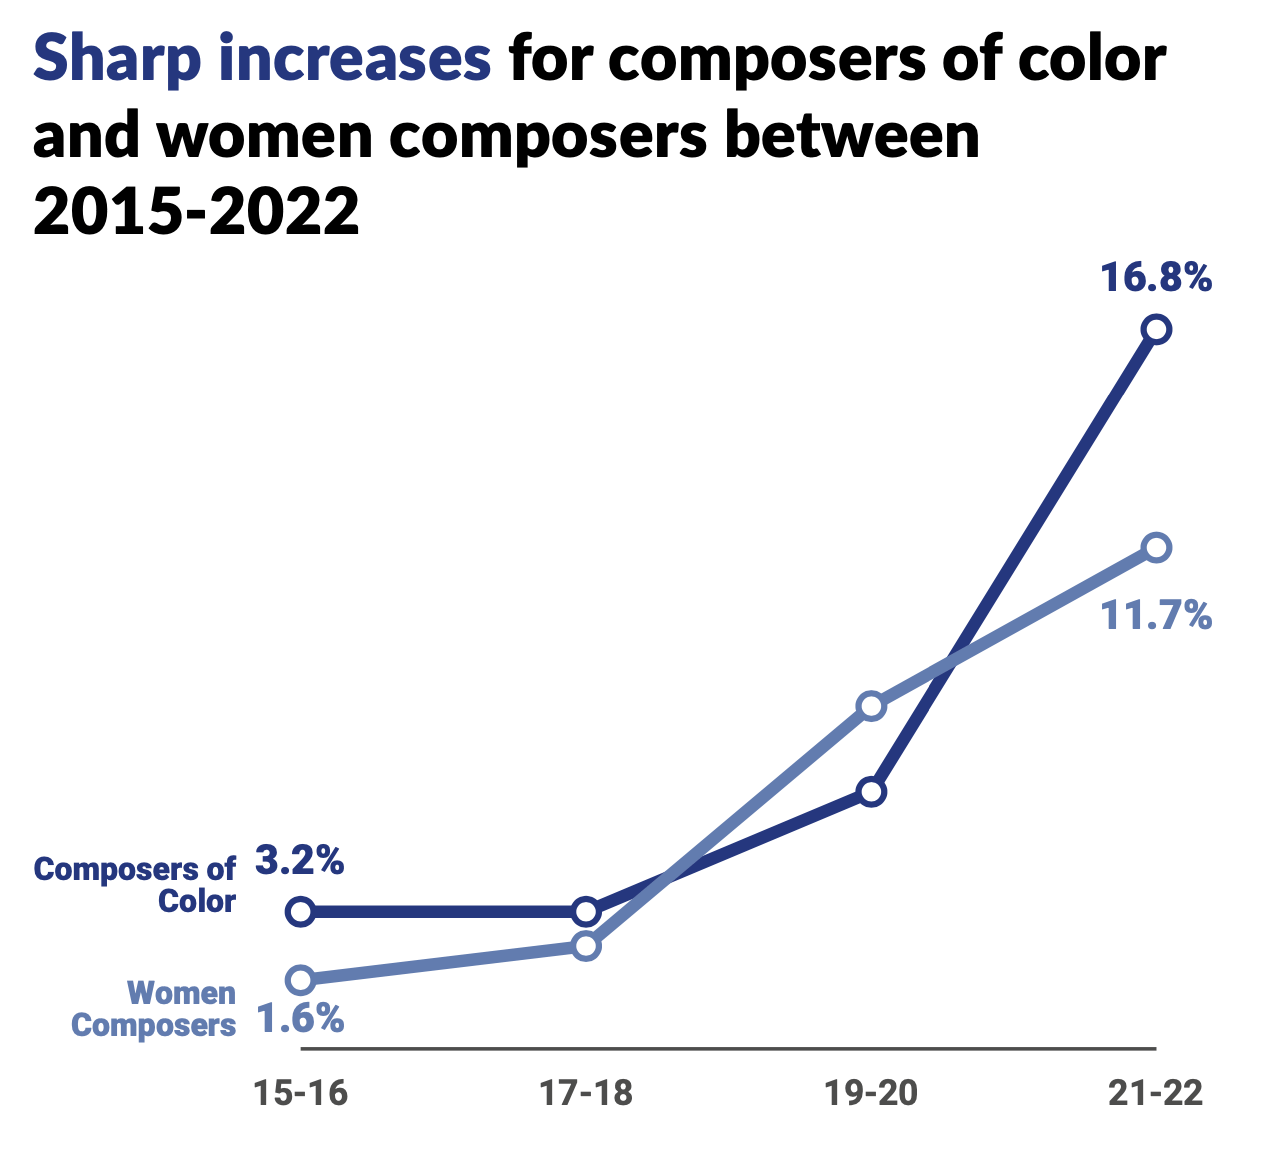 Graph showing the proportion of composers of colour increasing from 3.2% in 2015/16 to 16.8% in 2021/22 and the proportion of women composers increasing from 1.6% in 2015/16 to 11.7% in 2021/22